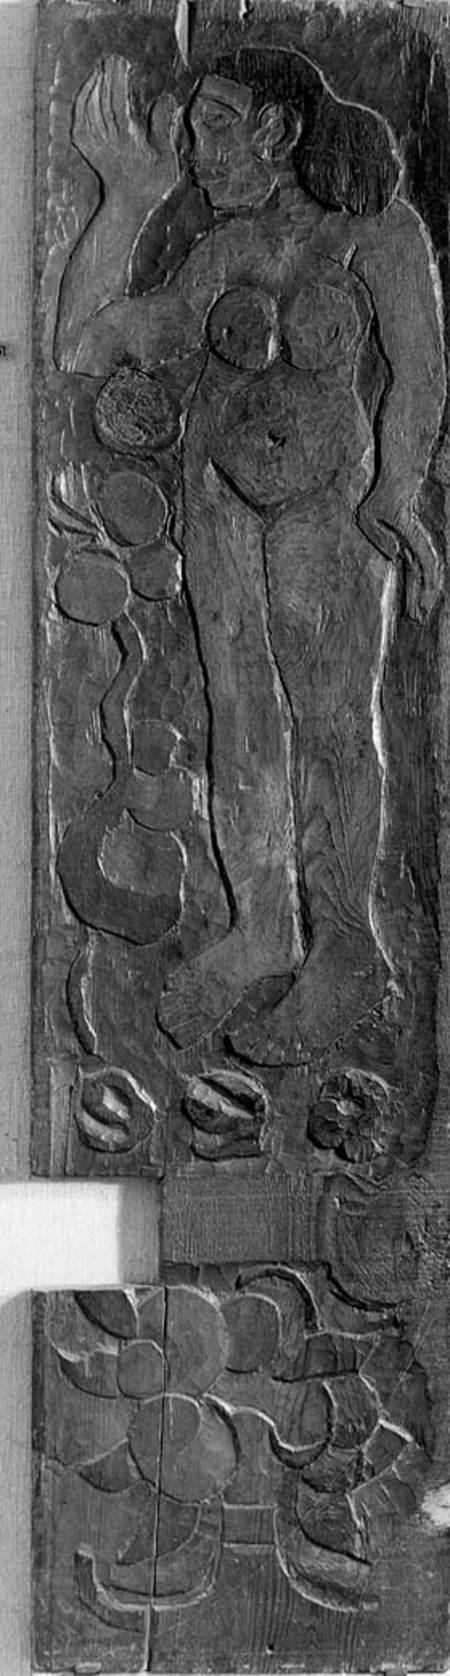 Carved vertical panel from the door frame of Gauguin's final residence in Atuona on Hiva Oa (Marques a Paul Gauguin